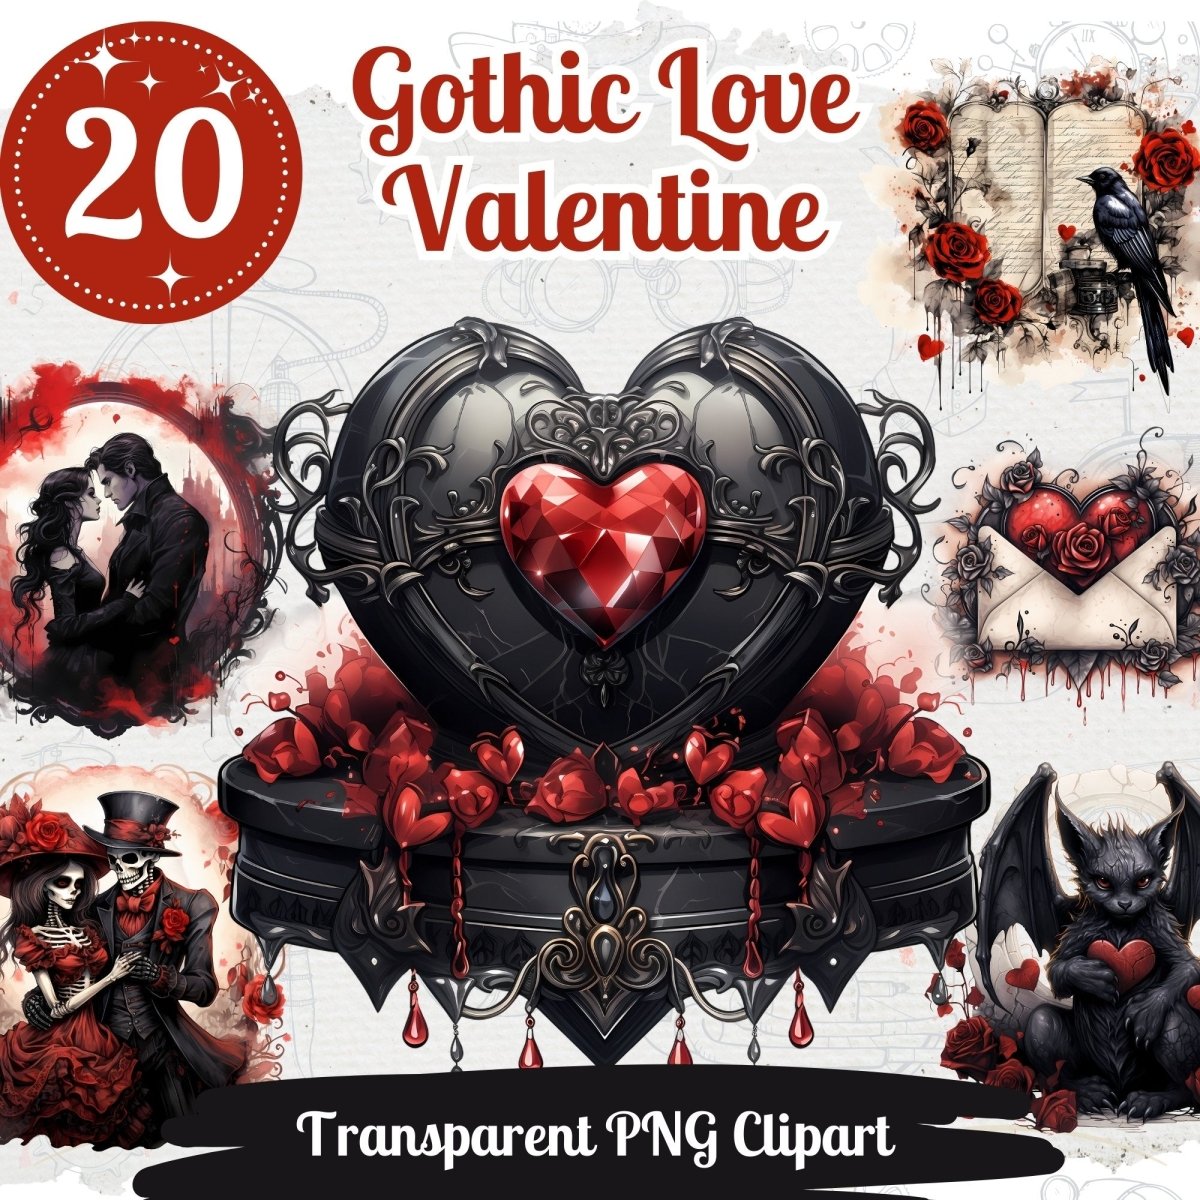 Gothic Love Cliparts 20 PNG Bundle Romantic Valentines Day Set Gothic Clipart Card Crafting Junk Journal Kit Romantic Vampire Couple - Everything Pixel